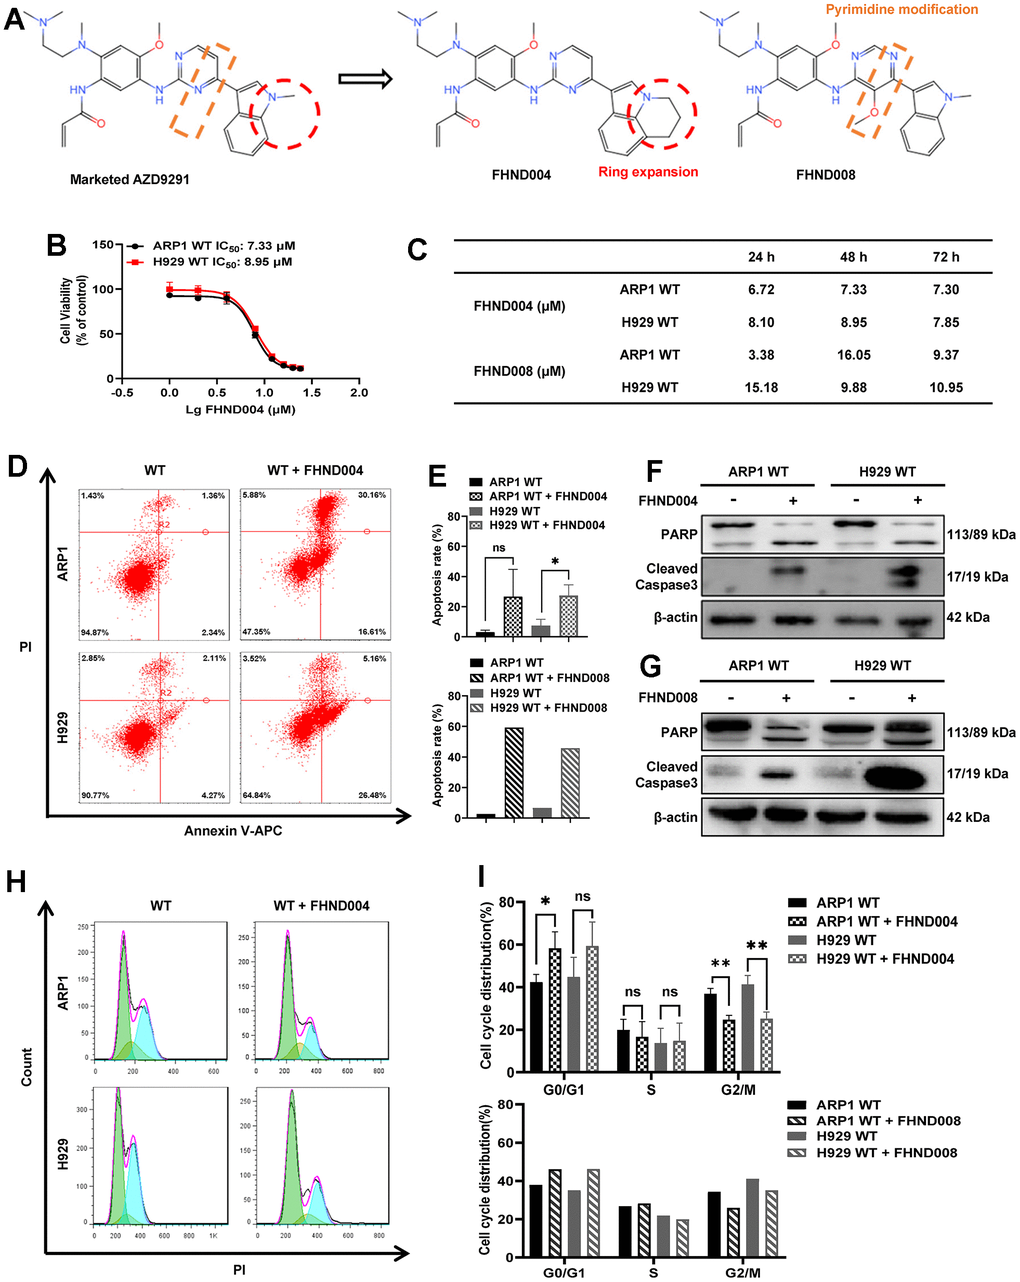 FHND004 and FHND008 inhibit cellular proliferation in MM cell lines. (A) The chemical structure of FHND004 and FHND008 were modified from the marked third-generation EGFR-TKI AZD2921. (B, C) Effects of FHND004 and FHND008 on viability of ARP1 WT and H929 WT cells. (D) Effects of 24 h treatment with FHND004 (4 μM) on cell apoptosis of ARP1 WT and H929 WT cells were determined by flow cytometry. (E) The apoptotic rate of ARP1 WT and H929 WT cells after 24 h treatment with FHND004 (4 μM) and FHND008 (4 μM) was determined quantitatively as histograms. (F, G) The expressions of PARP, cleaved caspase-3 and β-actin were detected by WB analysis after 24 h treatment with FHND004 (4 μM) and FHND008 (4 μM). (H) Effects of 48 h treatment with FHND004 (4 μM) on the cell cycle phases distribution of ARP1 WT and H929 WT cells was determined by flow cytometry. (I) The distributions of different cell cycle phases of ARP1 WT and H929 WT cells after 48 h treatment with FHND004 (4 μM) and FHND008 (4 μM) were determined quantitatively. The data of FHND004 were expressed as the mean ± SD; p p p 